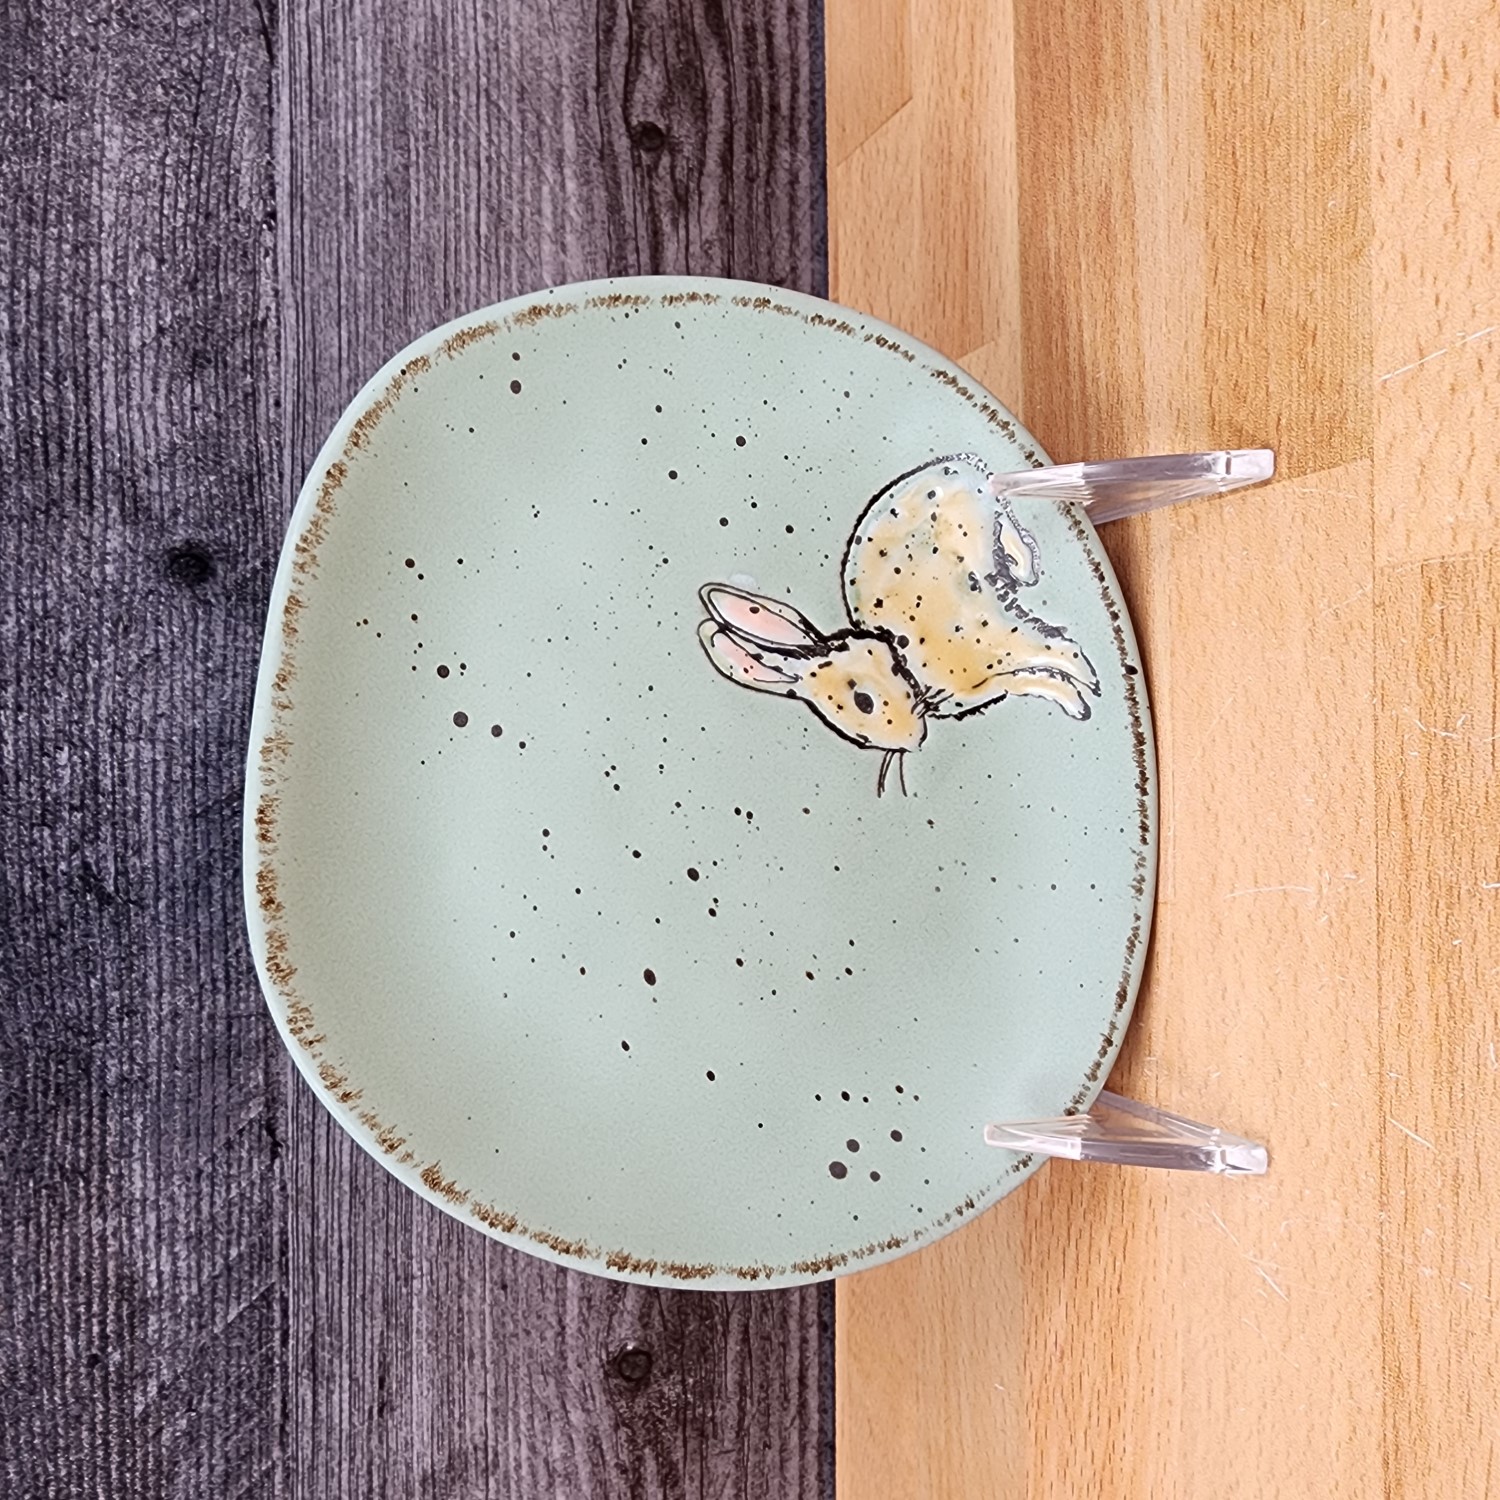 This Easter Bunny Embossed Set of Plate 4 Aqua Color 5" (13cm) by Blue Sky Clayworks is made with love by Premier Homegoods! Shop more unique gift ideas today with Spots Initiatives, the best way to support creators.